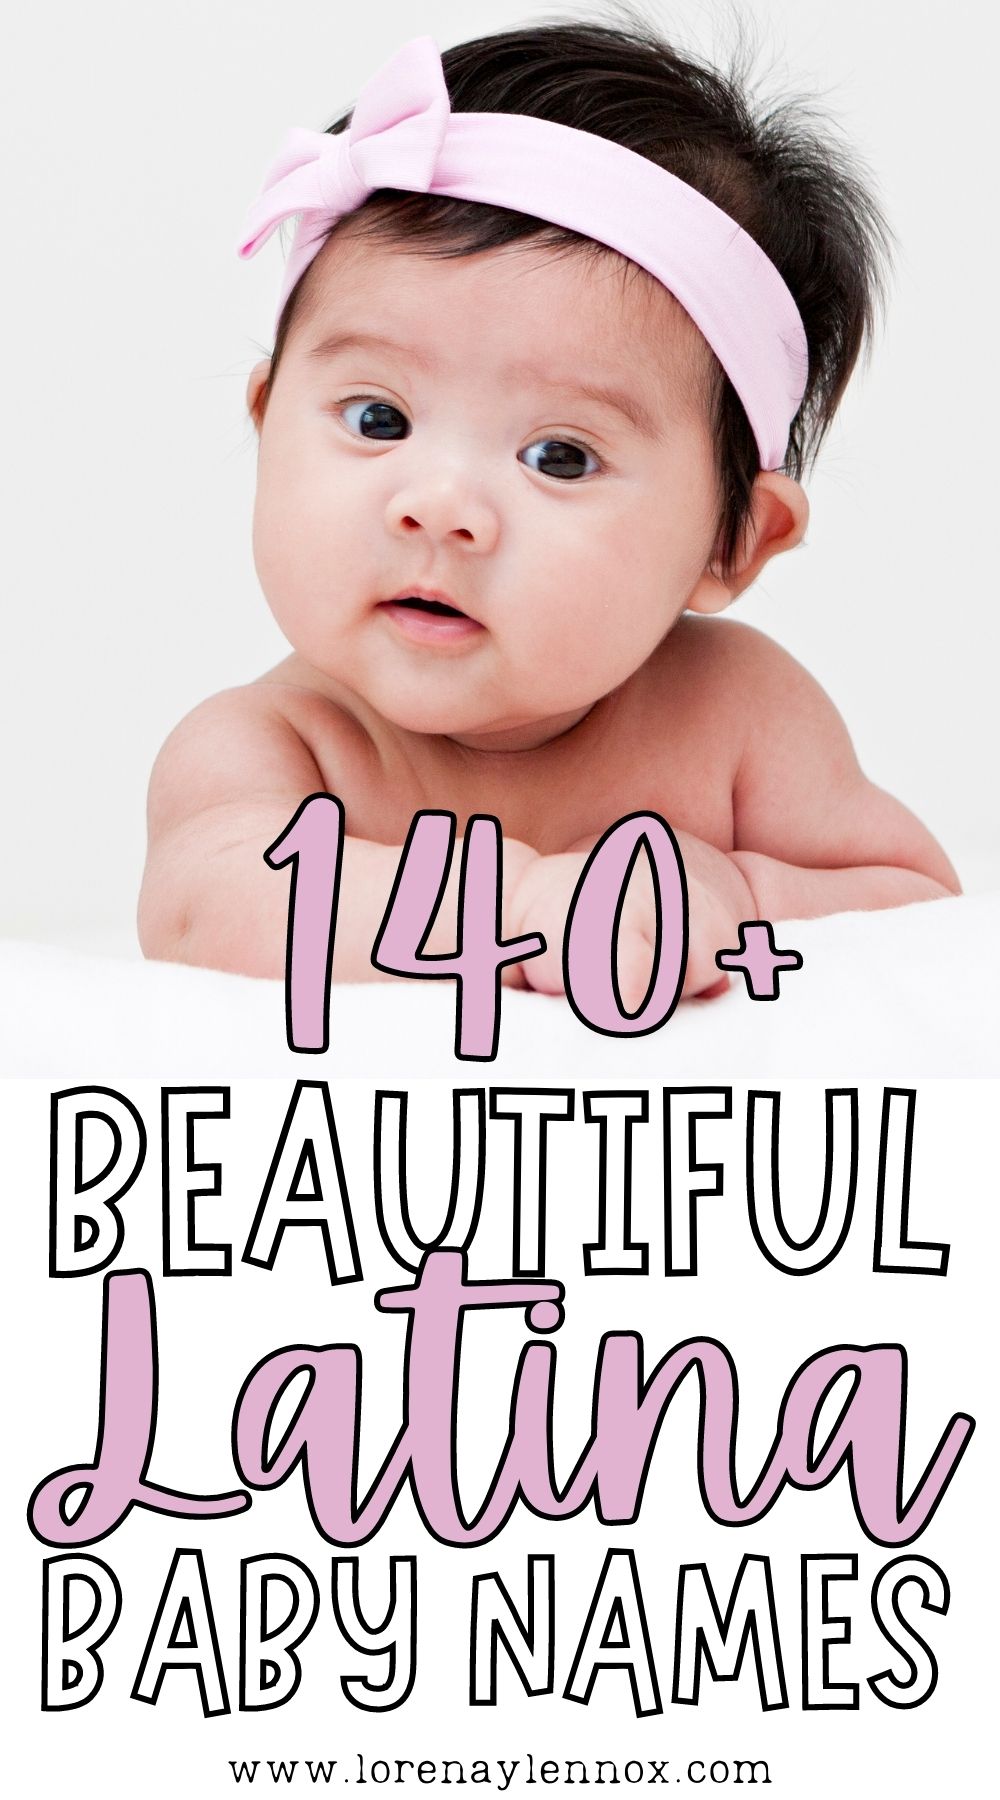 Choosing a baby name can be so very exciting yet daunting at the same time.If you plan on choosing a Latina girl name to carry on your Hispanic heritage, the decision-making process can be even more stressful!Therefore, I hope to ease your baby name selection with this collection of 140+ Beautiful Latina girl names.